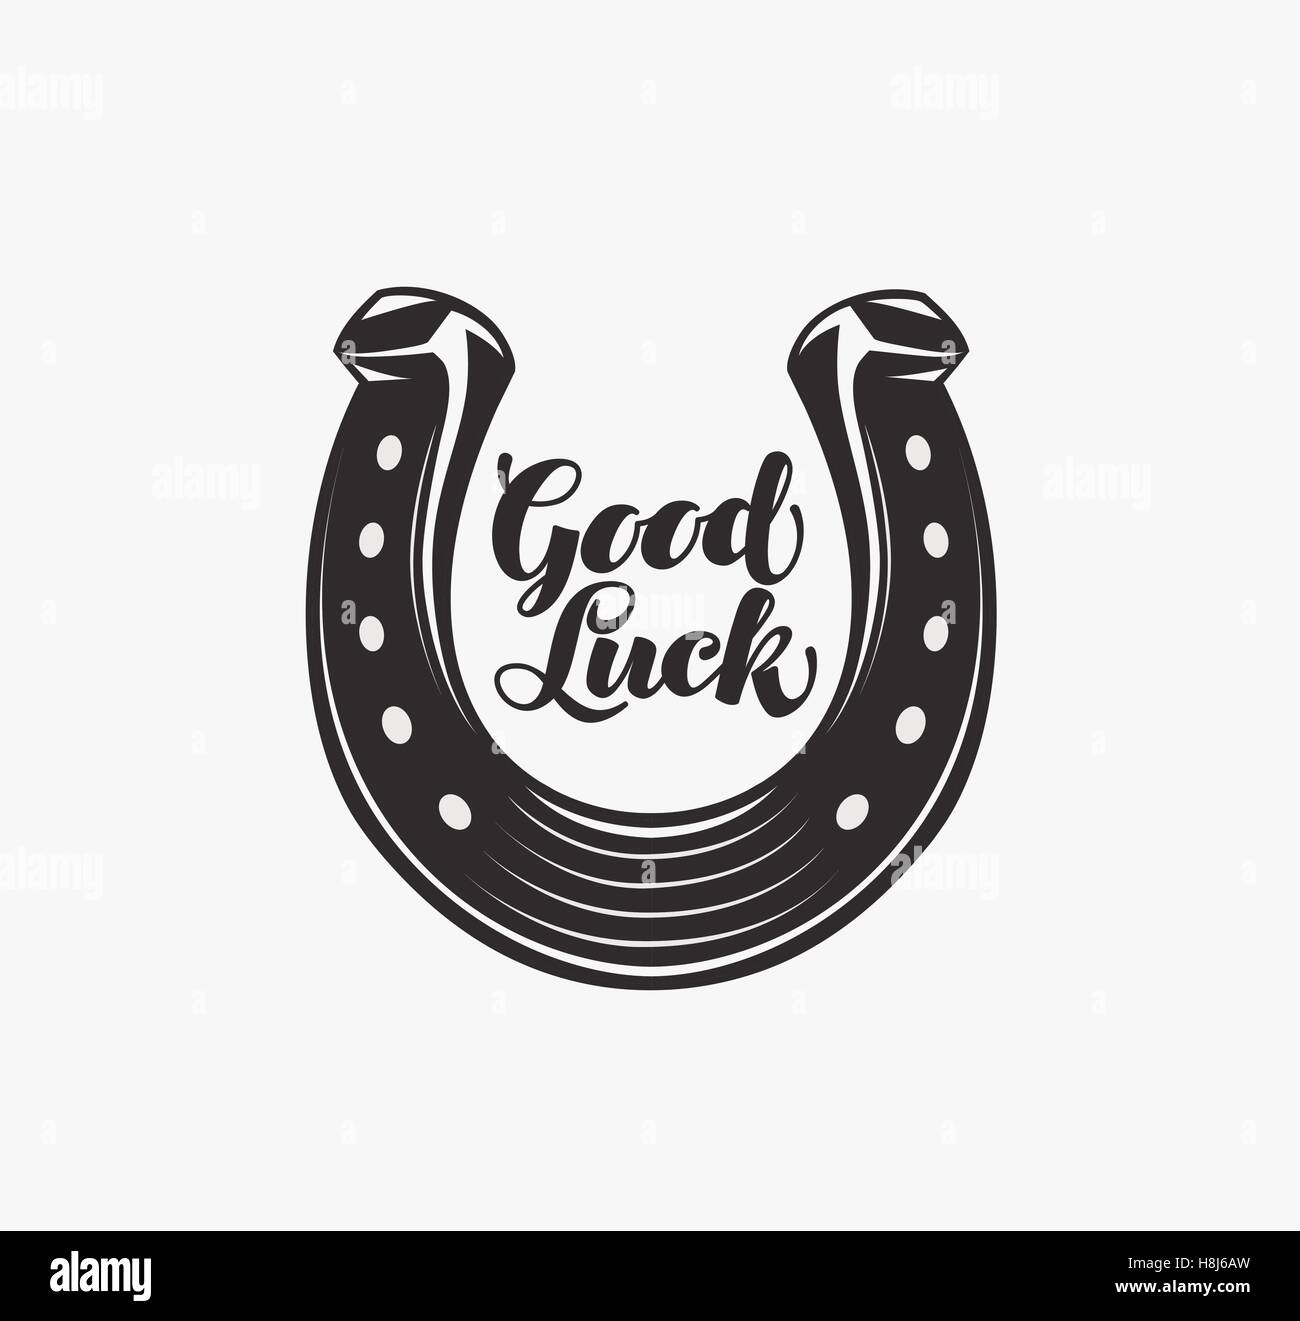 Good luck. Horseshoe with inscription. Vector symbol or icon Stock Vector